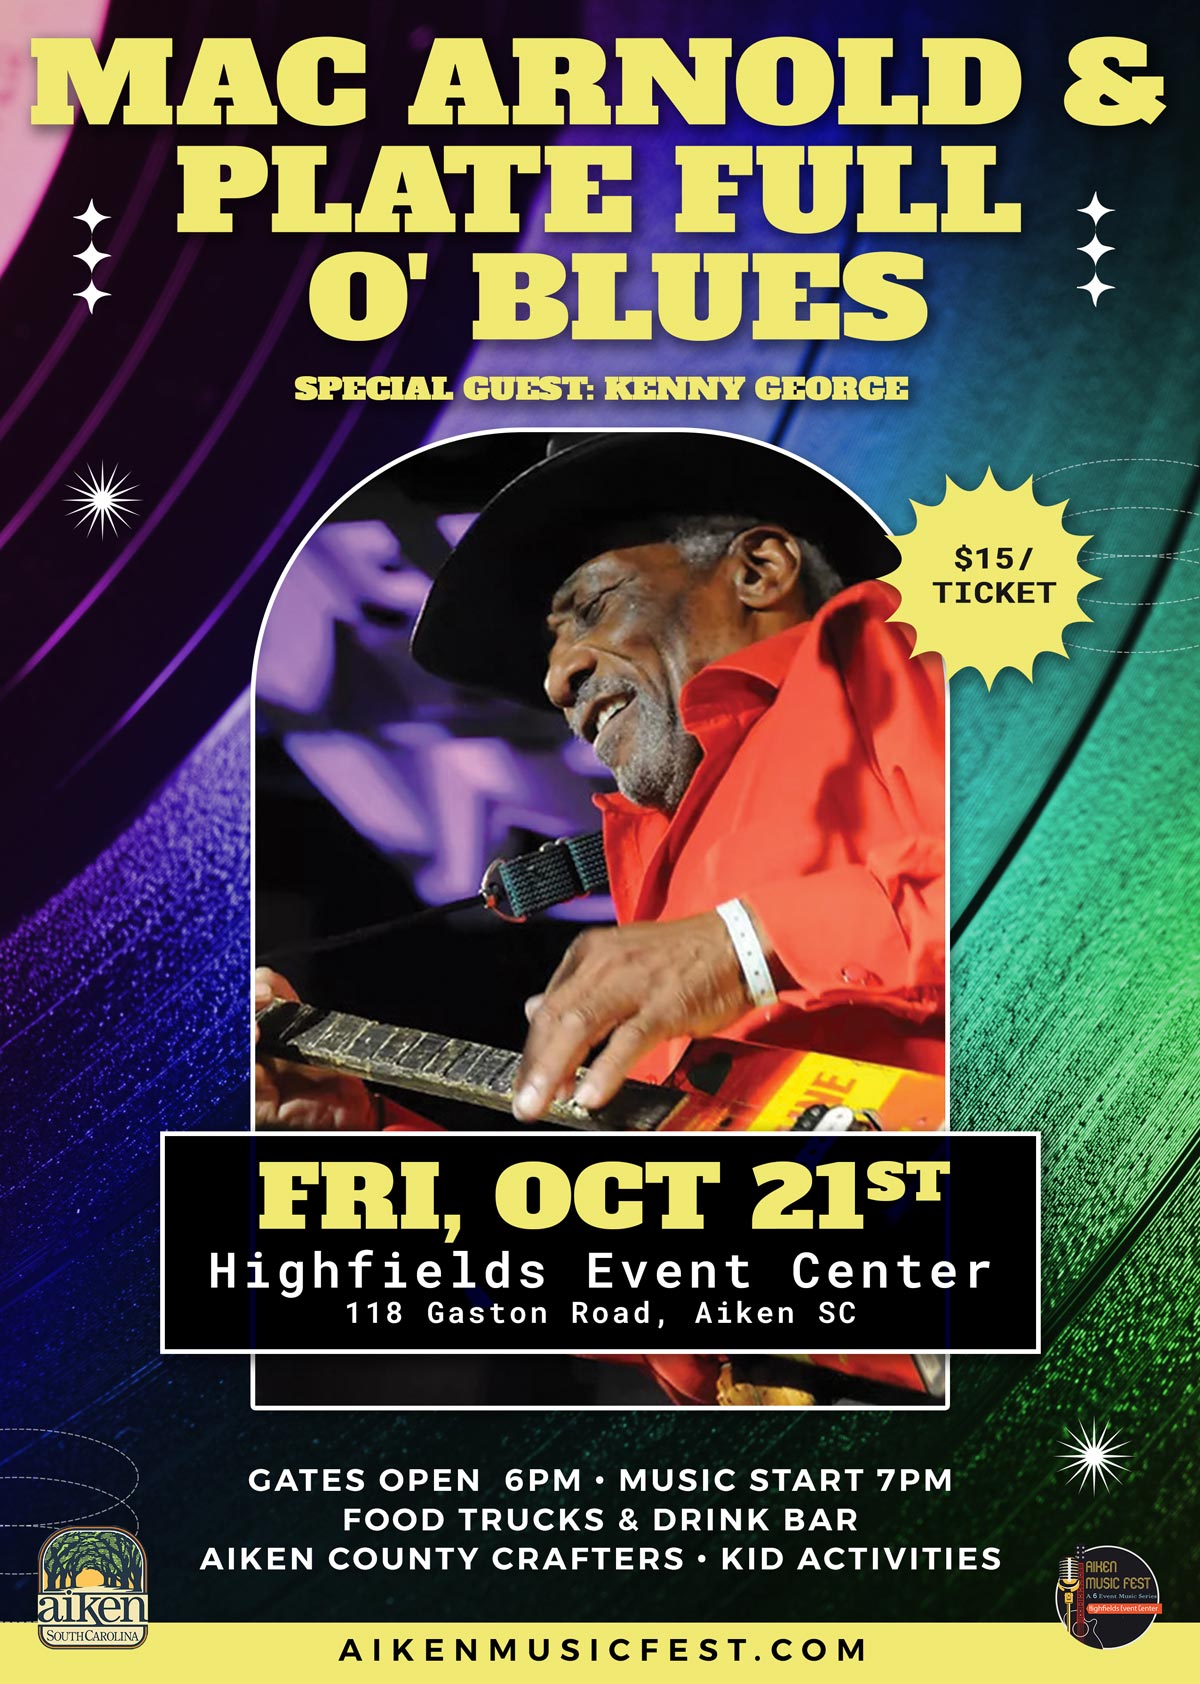 Mac Arnold & Plate Full O' Blues Poster